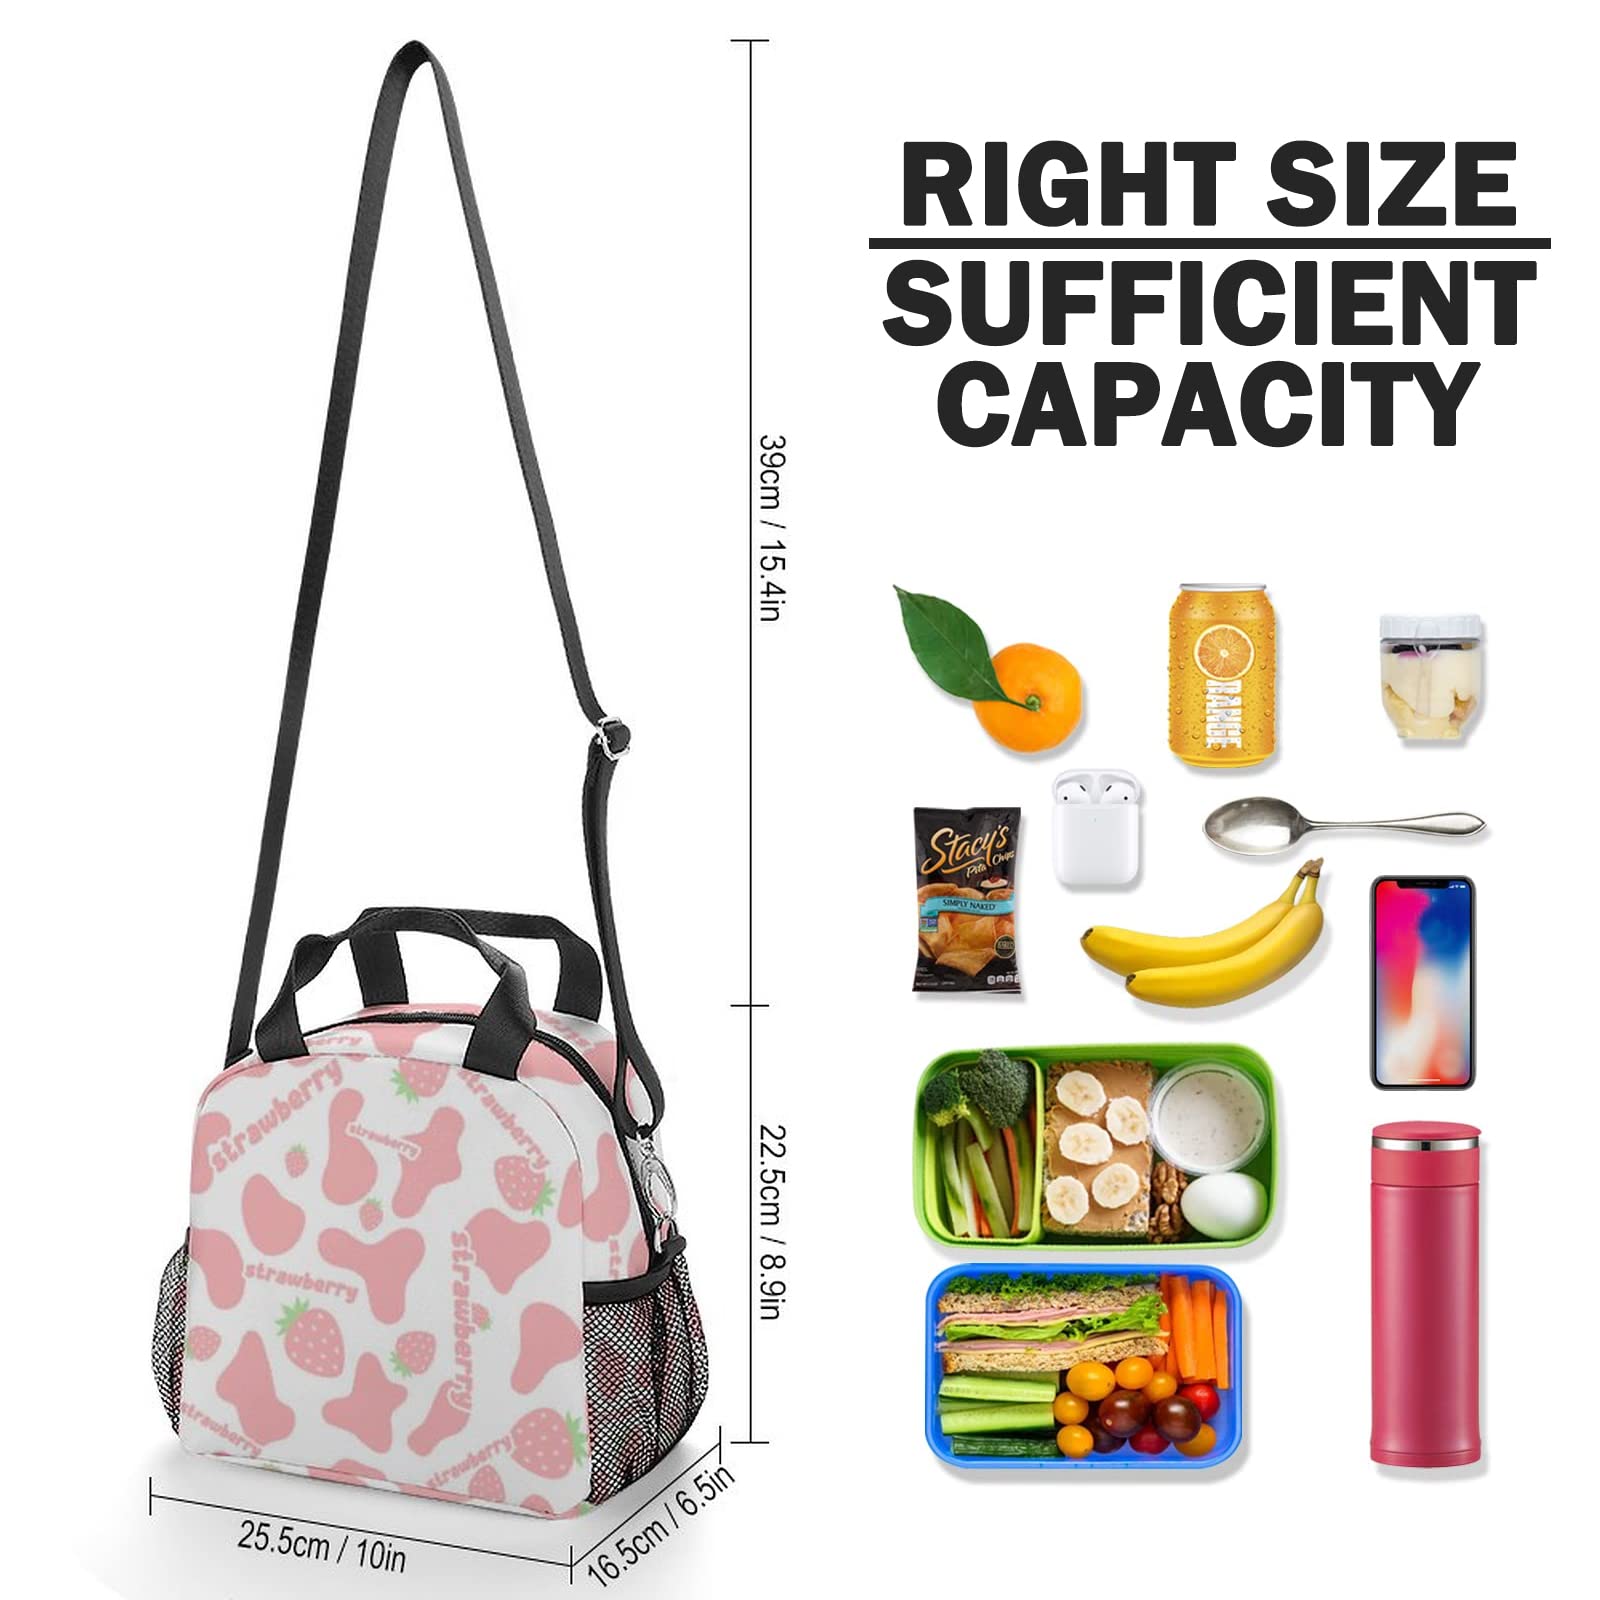 Fashion Insulation Strawberry Lunch Bag with Shoulder Strap Durable Pink Cow Print Lunch Box Waterproof Lunch Tote Bag with Pockets for Girl Women